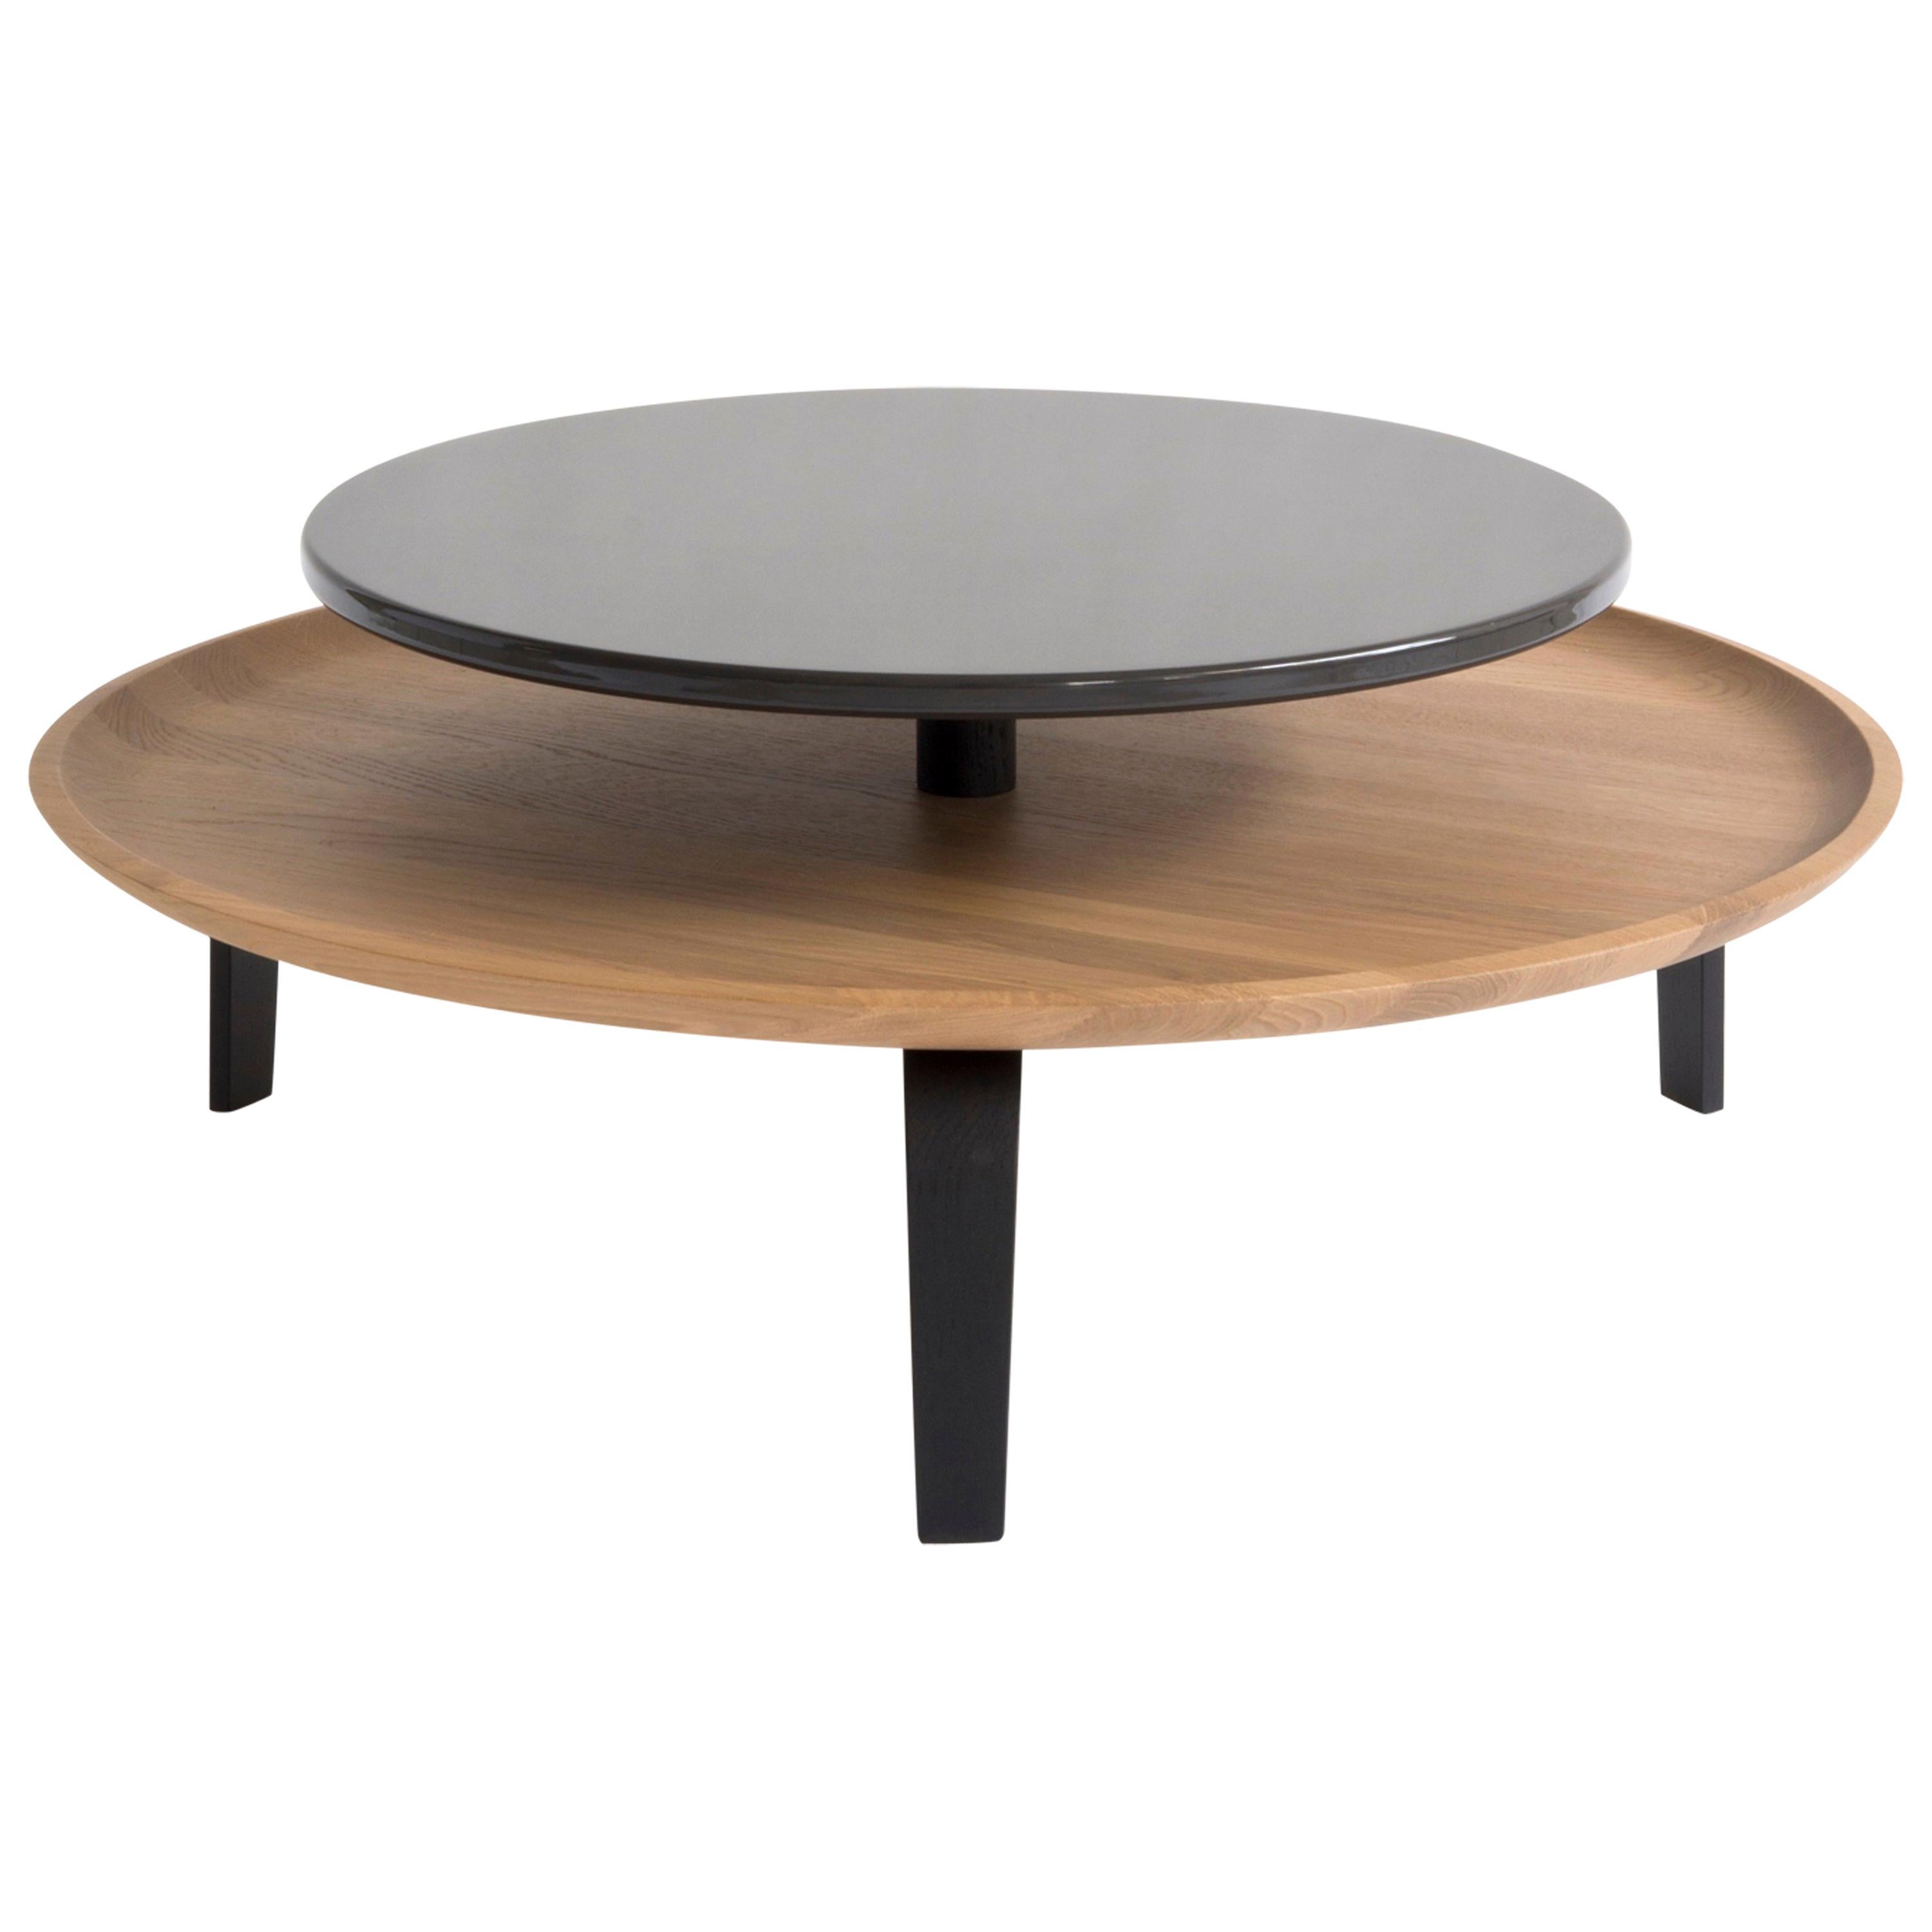 Secreto Round Coffee Table by Colé, Natural Oak and Black Lacquered Top For Sale